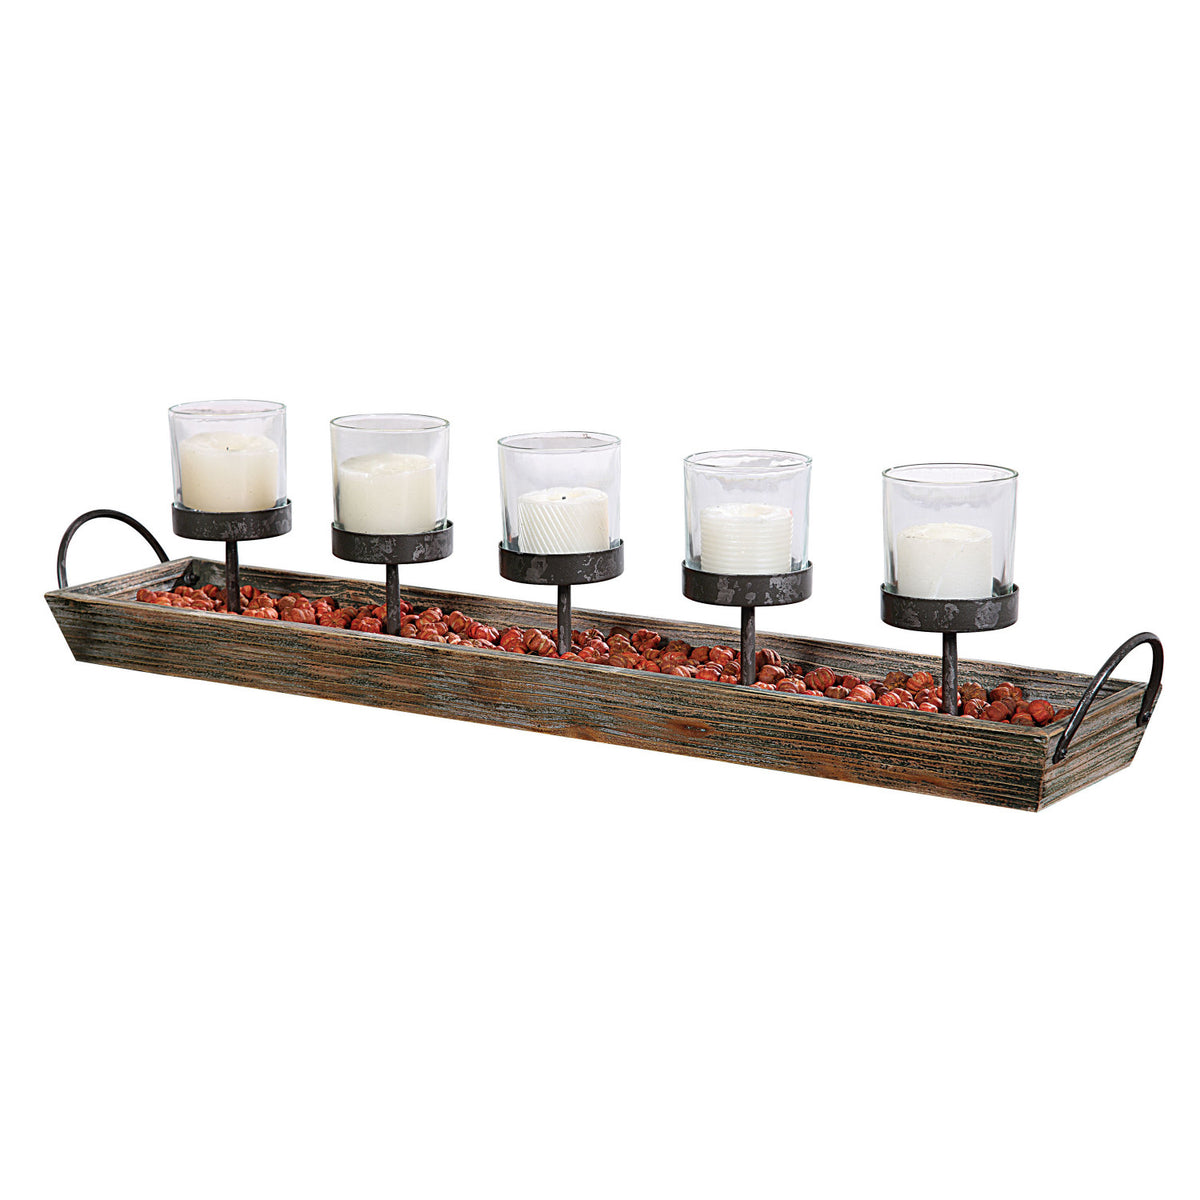 Wood and Metal Votive Holder with Glass Votives